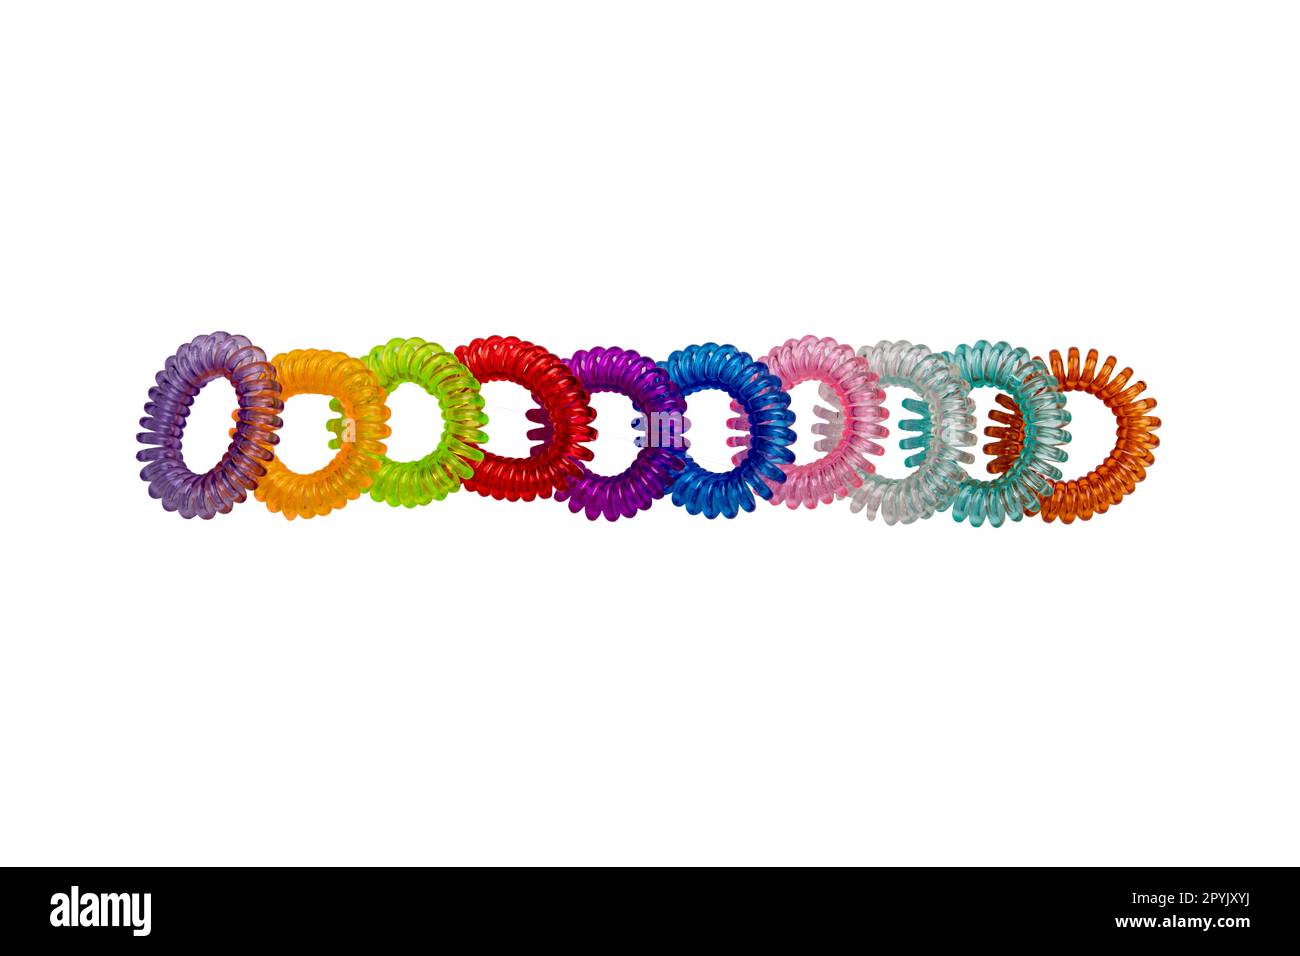 Hair care tools isolated. Close-up of multicolored elastic spiral scrunchies or hair bands for women hairstyling. Clipping path. Tools from hairdresser and beauty salon. Stock Photo